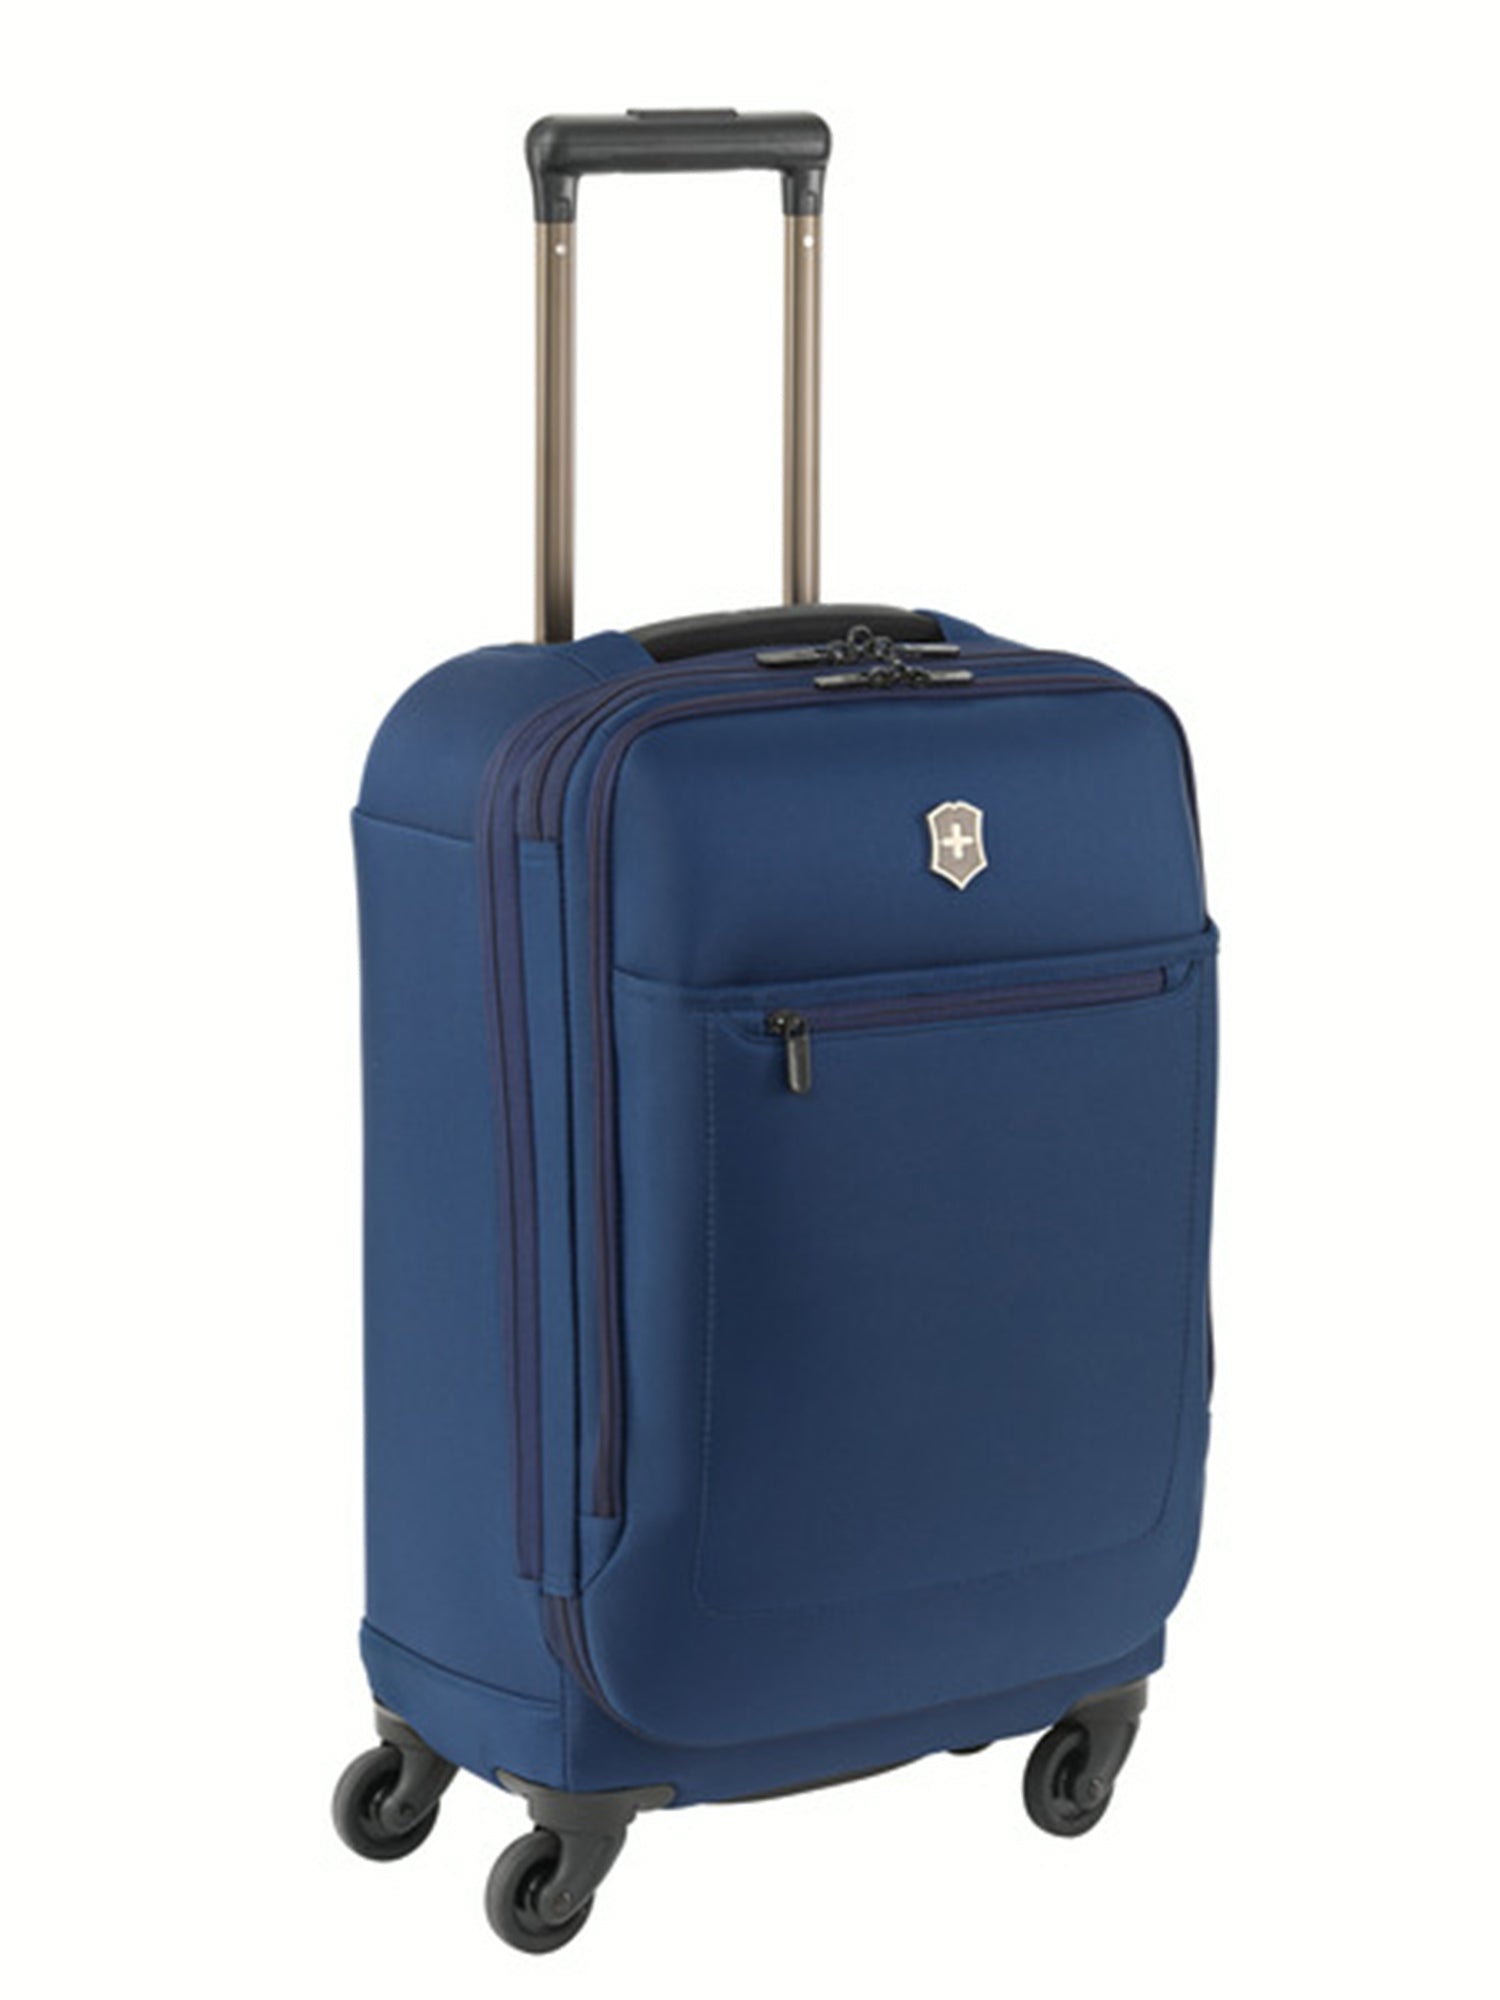 Victorinox Avolve 3.0 Carry-On, Frequent Flyer (22") 4-Wheel Carry-On – Luggage Online